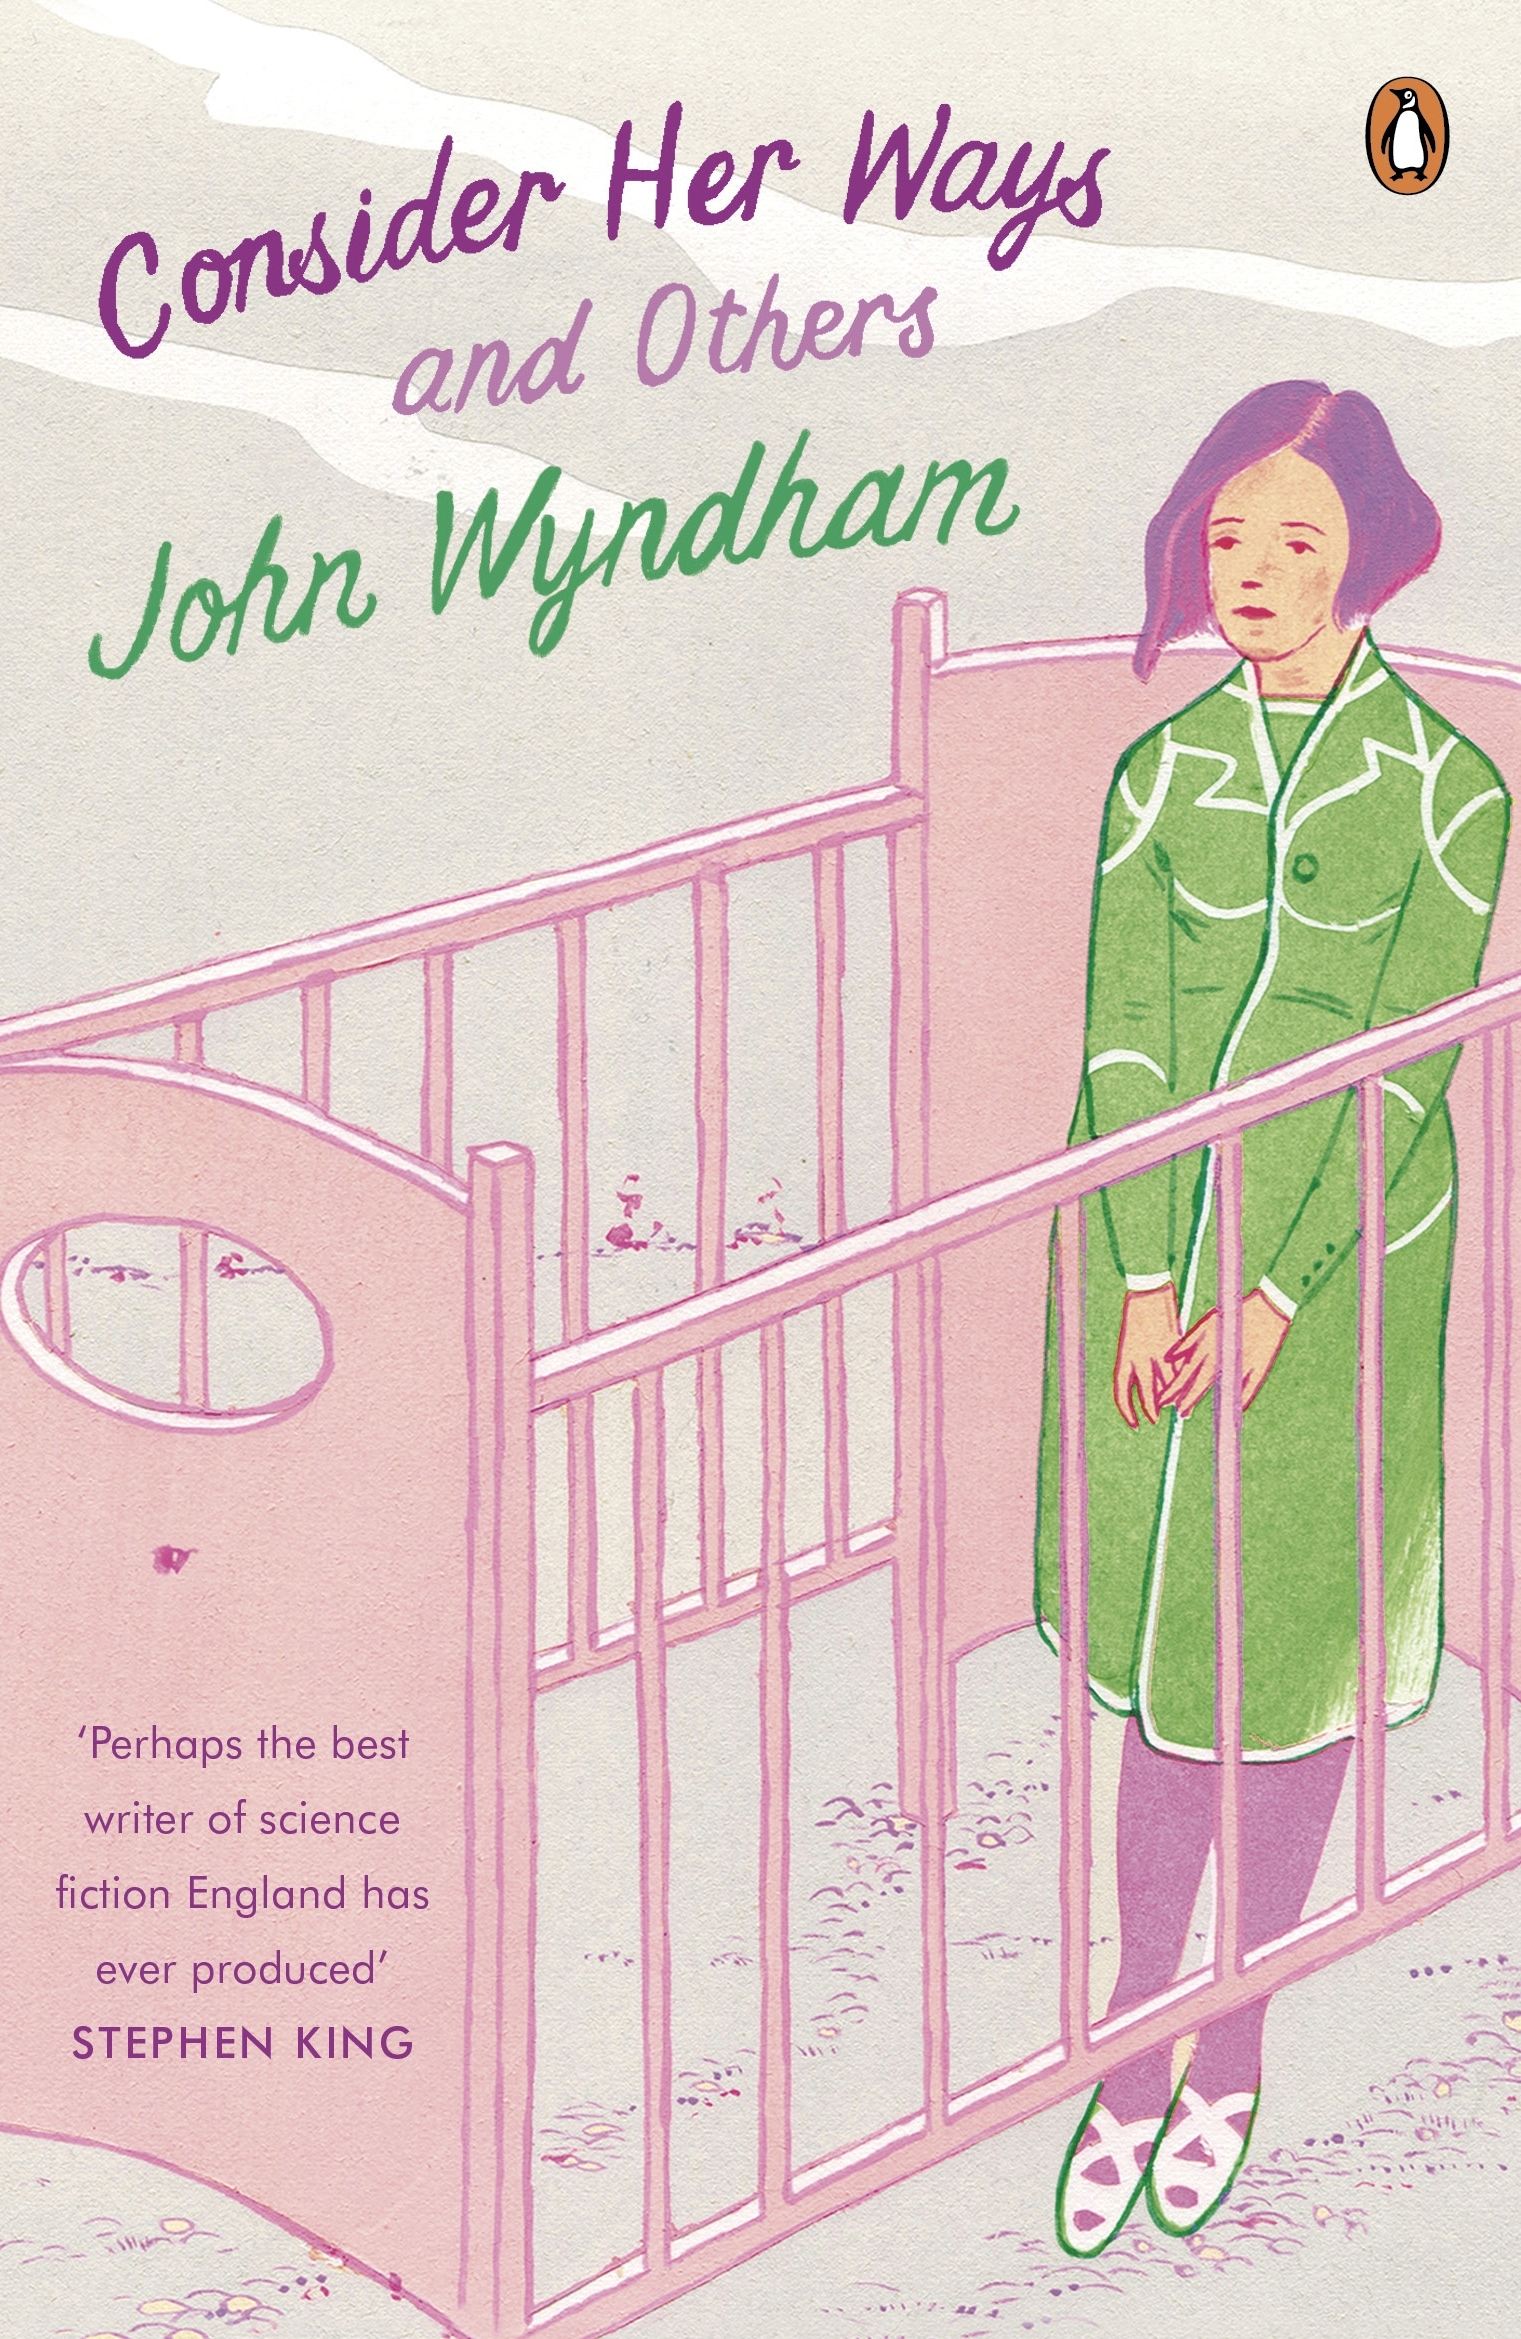 She ways. John Wyndham consider her way and others. Consider.